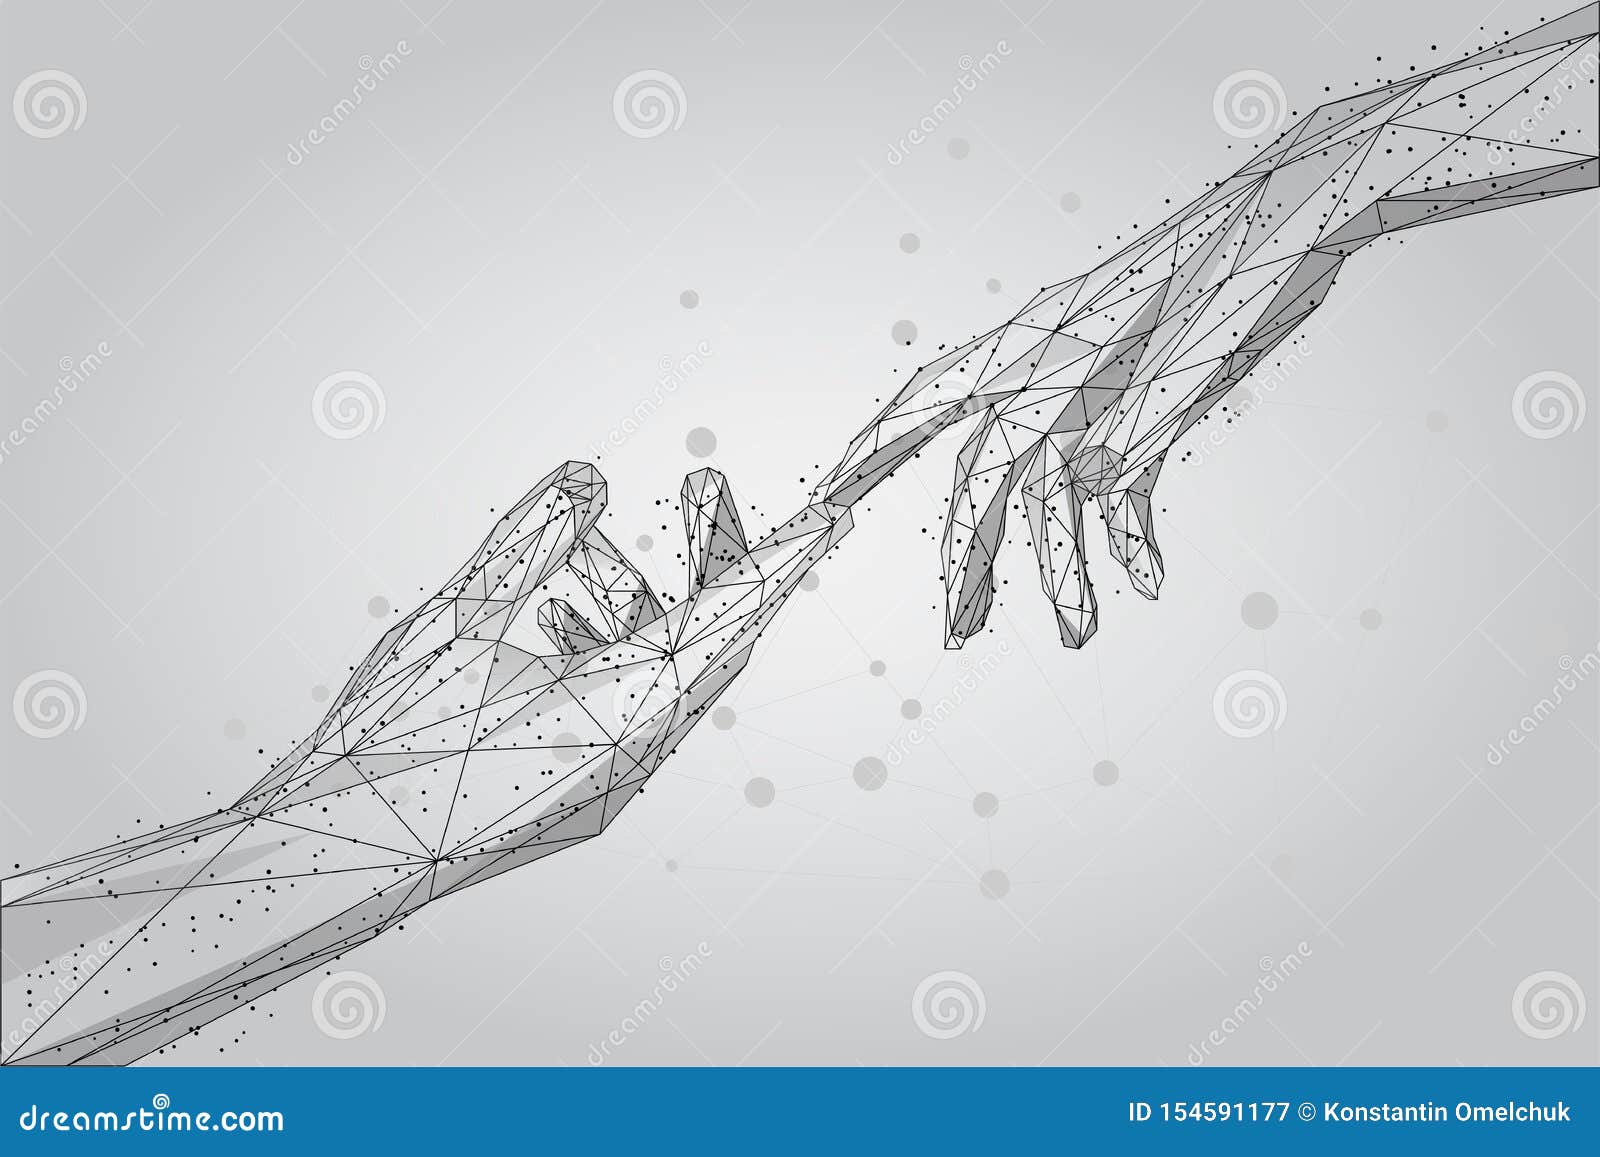 low poly wireframe human hands touching with fingers from lines, triangles and particles.